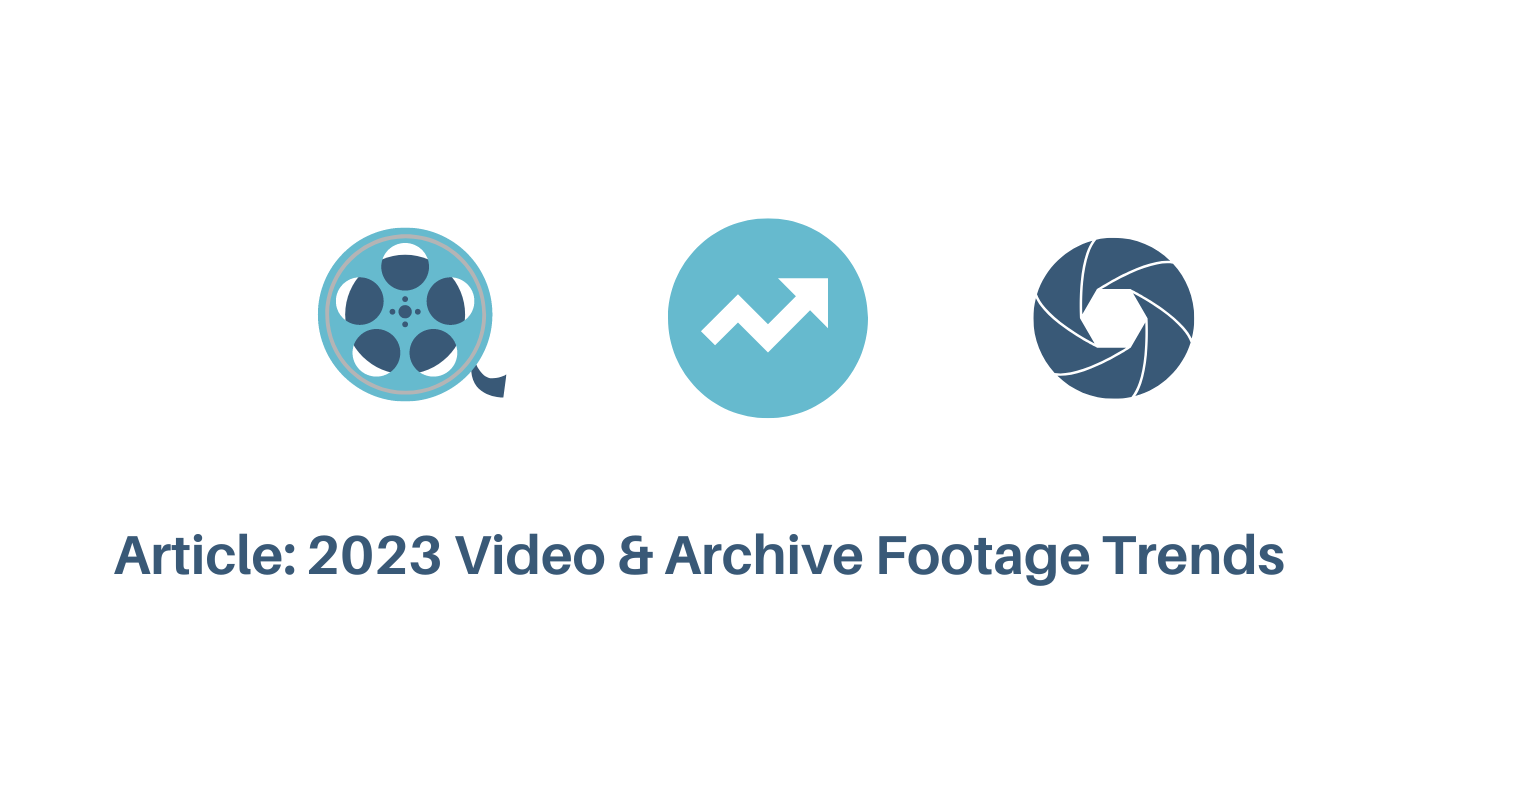 ARTICLE: PROGRAMMING TRENDS & THE USE OF ARCHIVE FOOTAGE